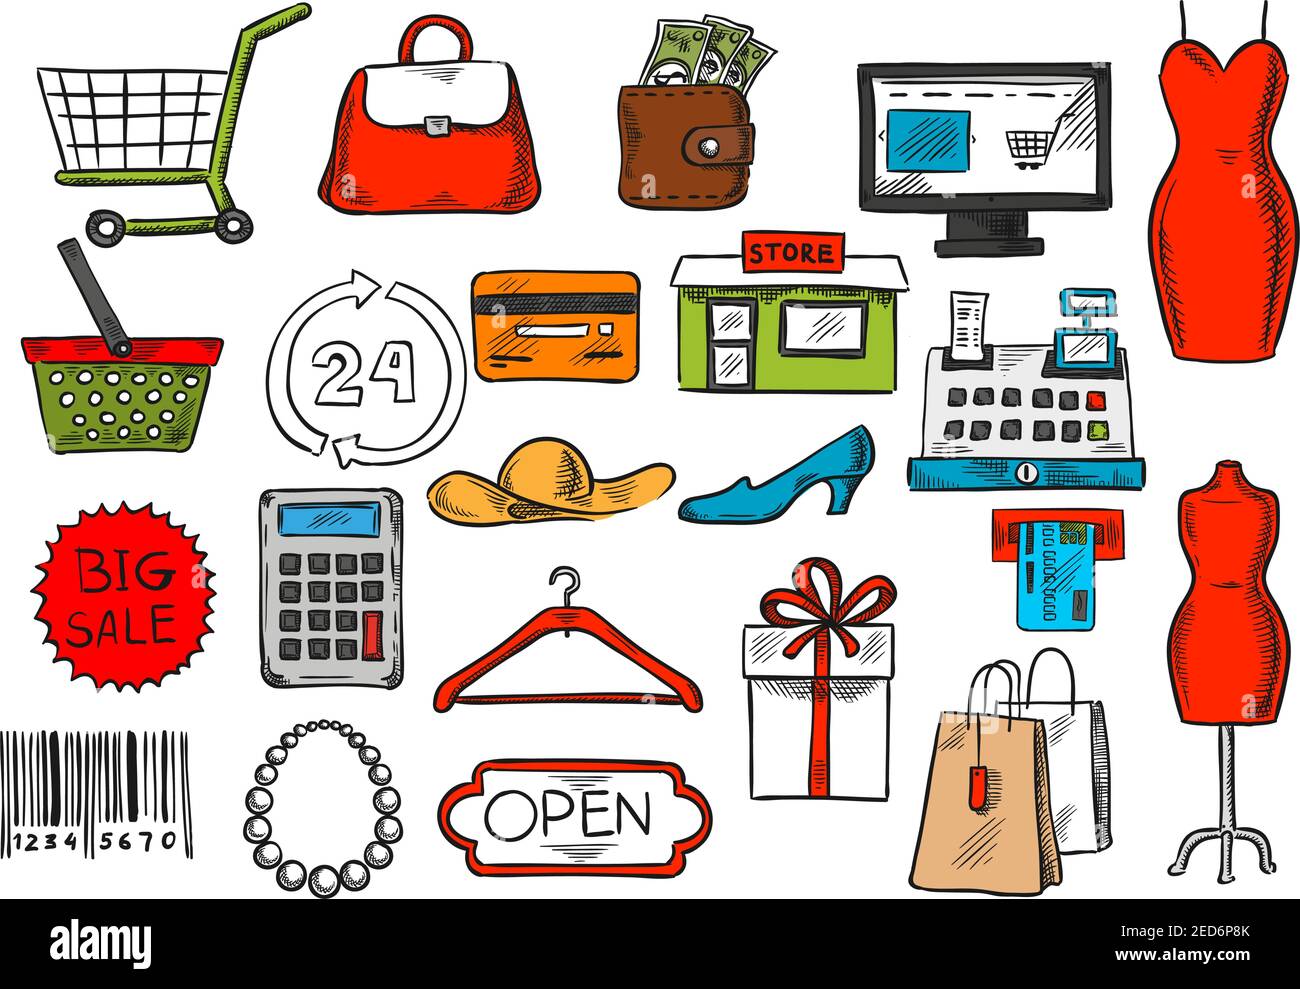 https://c8.alamy.com/comp/2ED6P8K/shopping-icons-set-vector-isolated-retail-and-purchase-items-of-shop-counter-woman-dress-and-credit-card-clothes-hanger-and-shoes-gift-box-and-sho-2ED6P8K.jpg